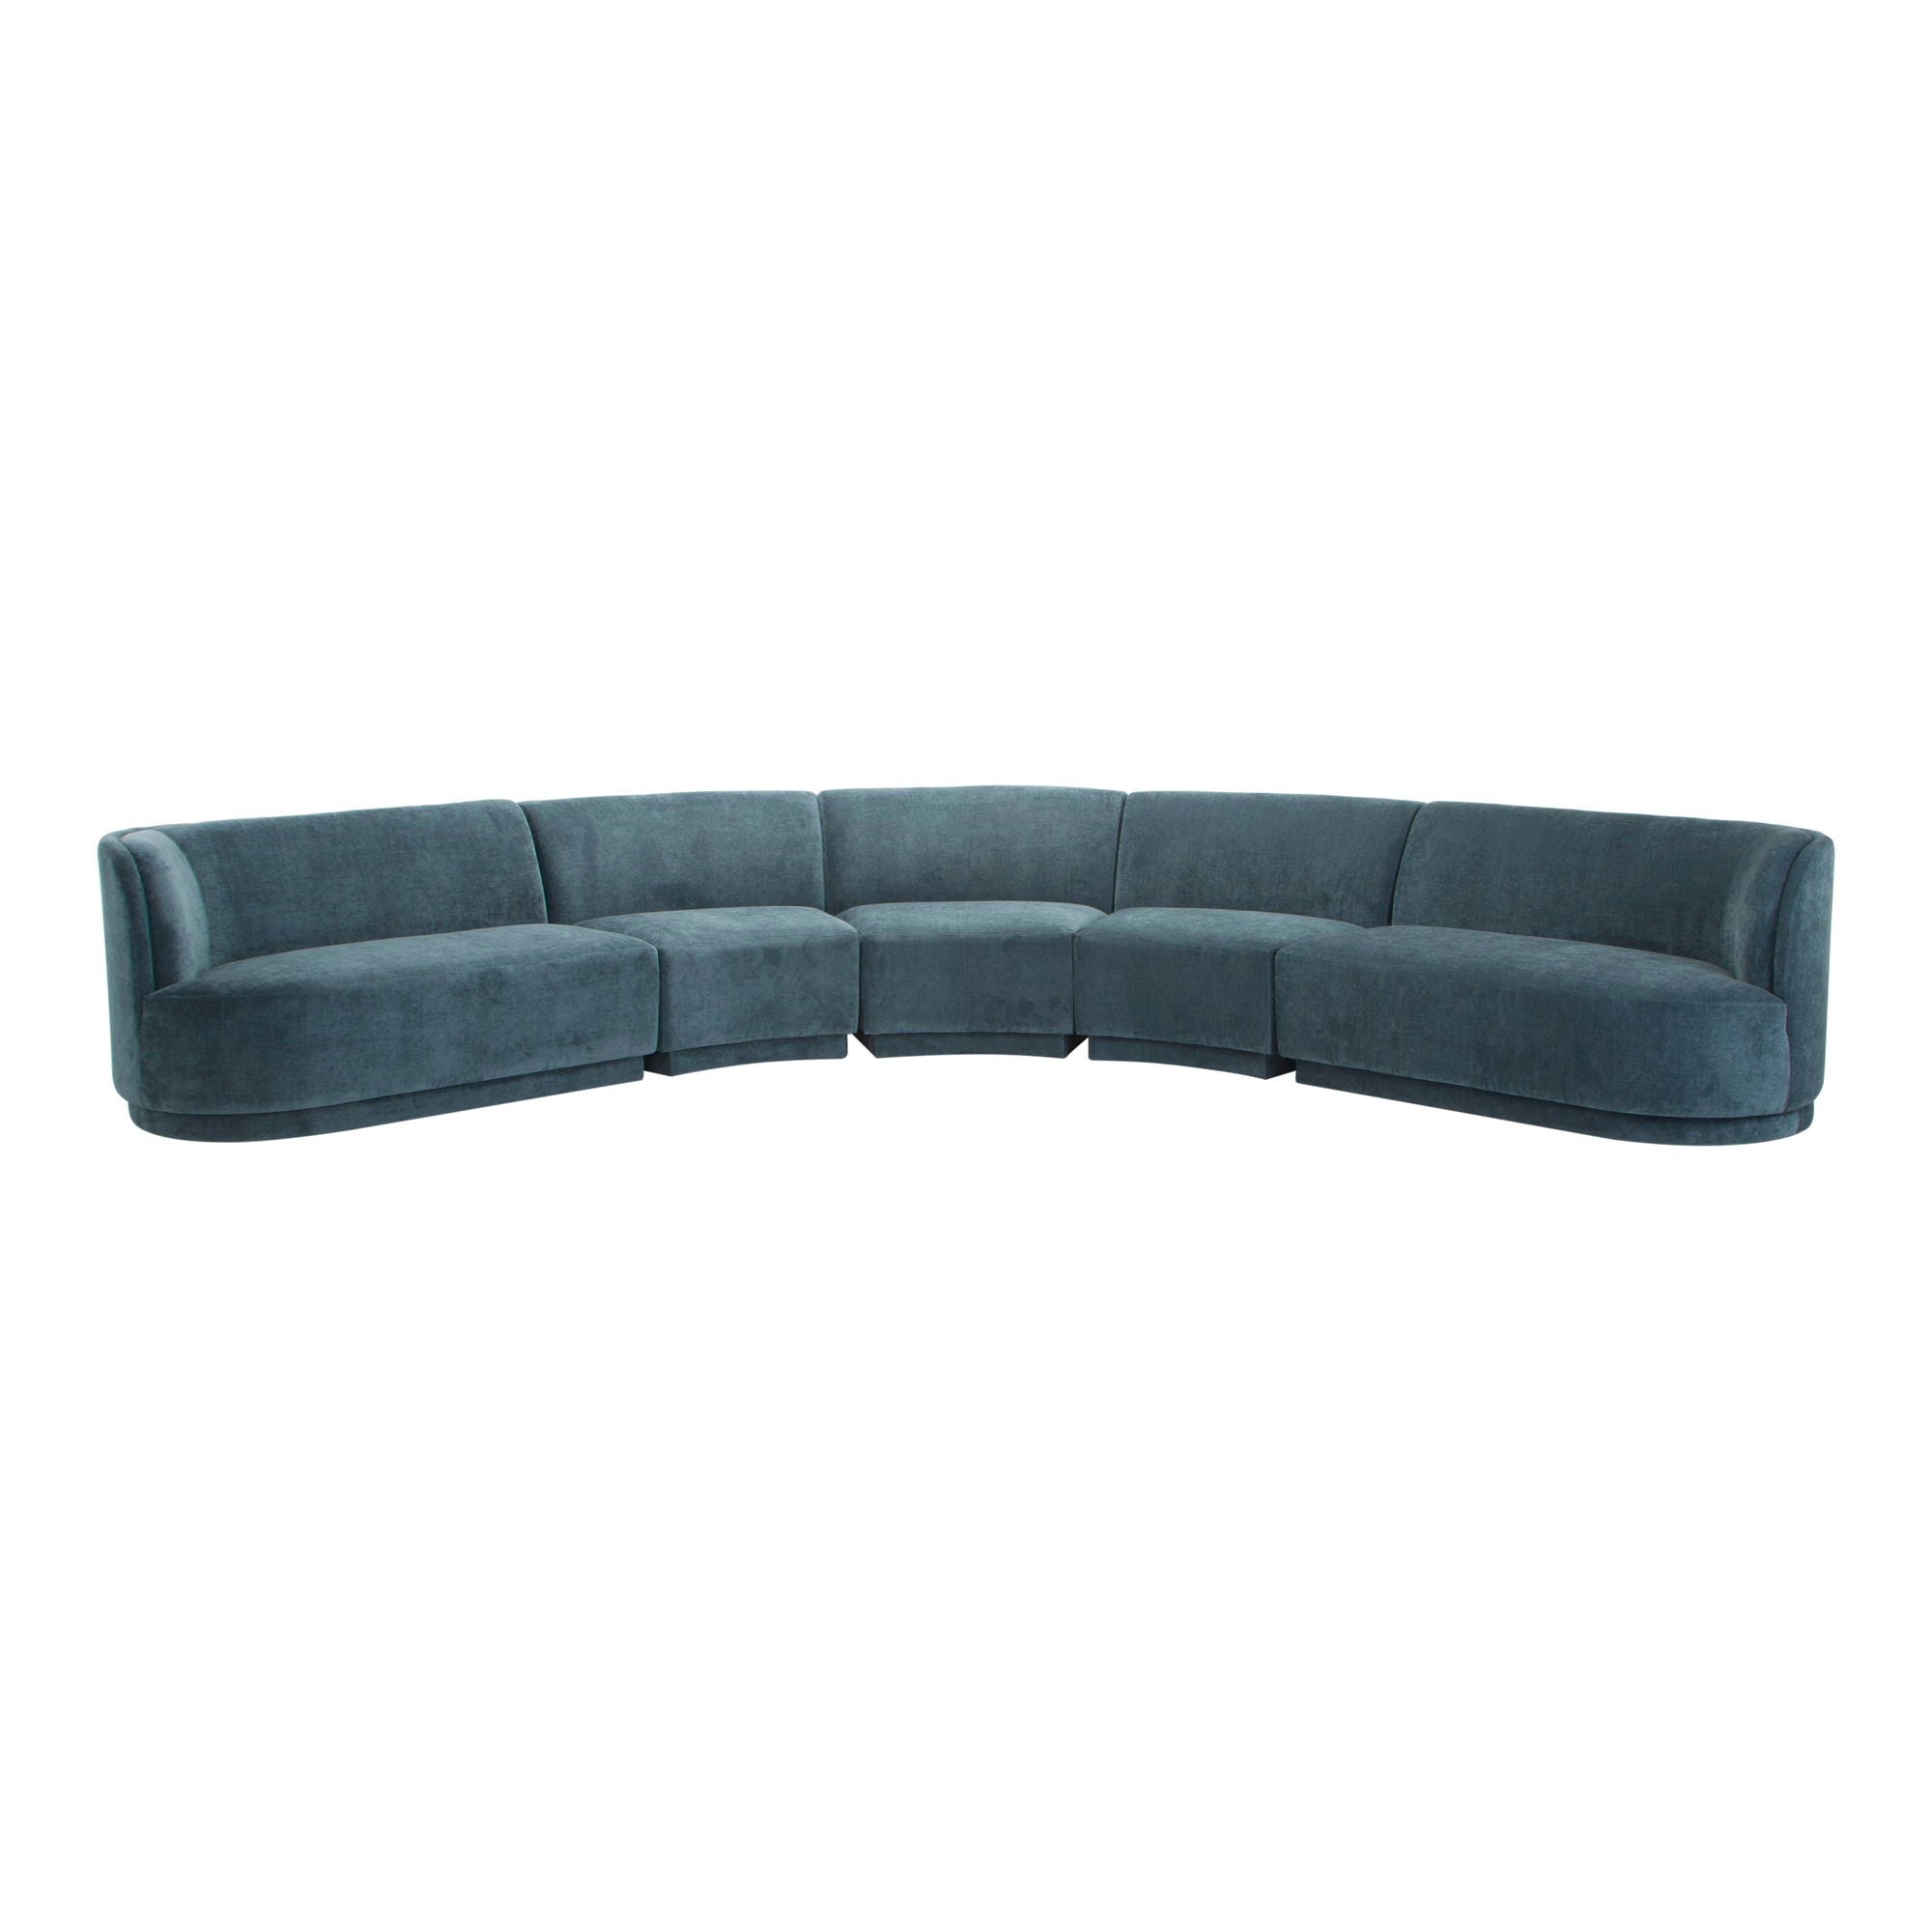 Yoon Radius Sectional - Blue Velvet, Modular Design-Stationary Sectionals-American Furniture Outlet